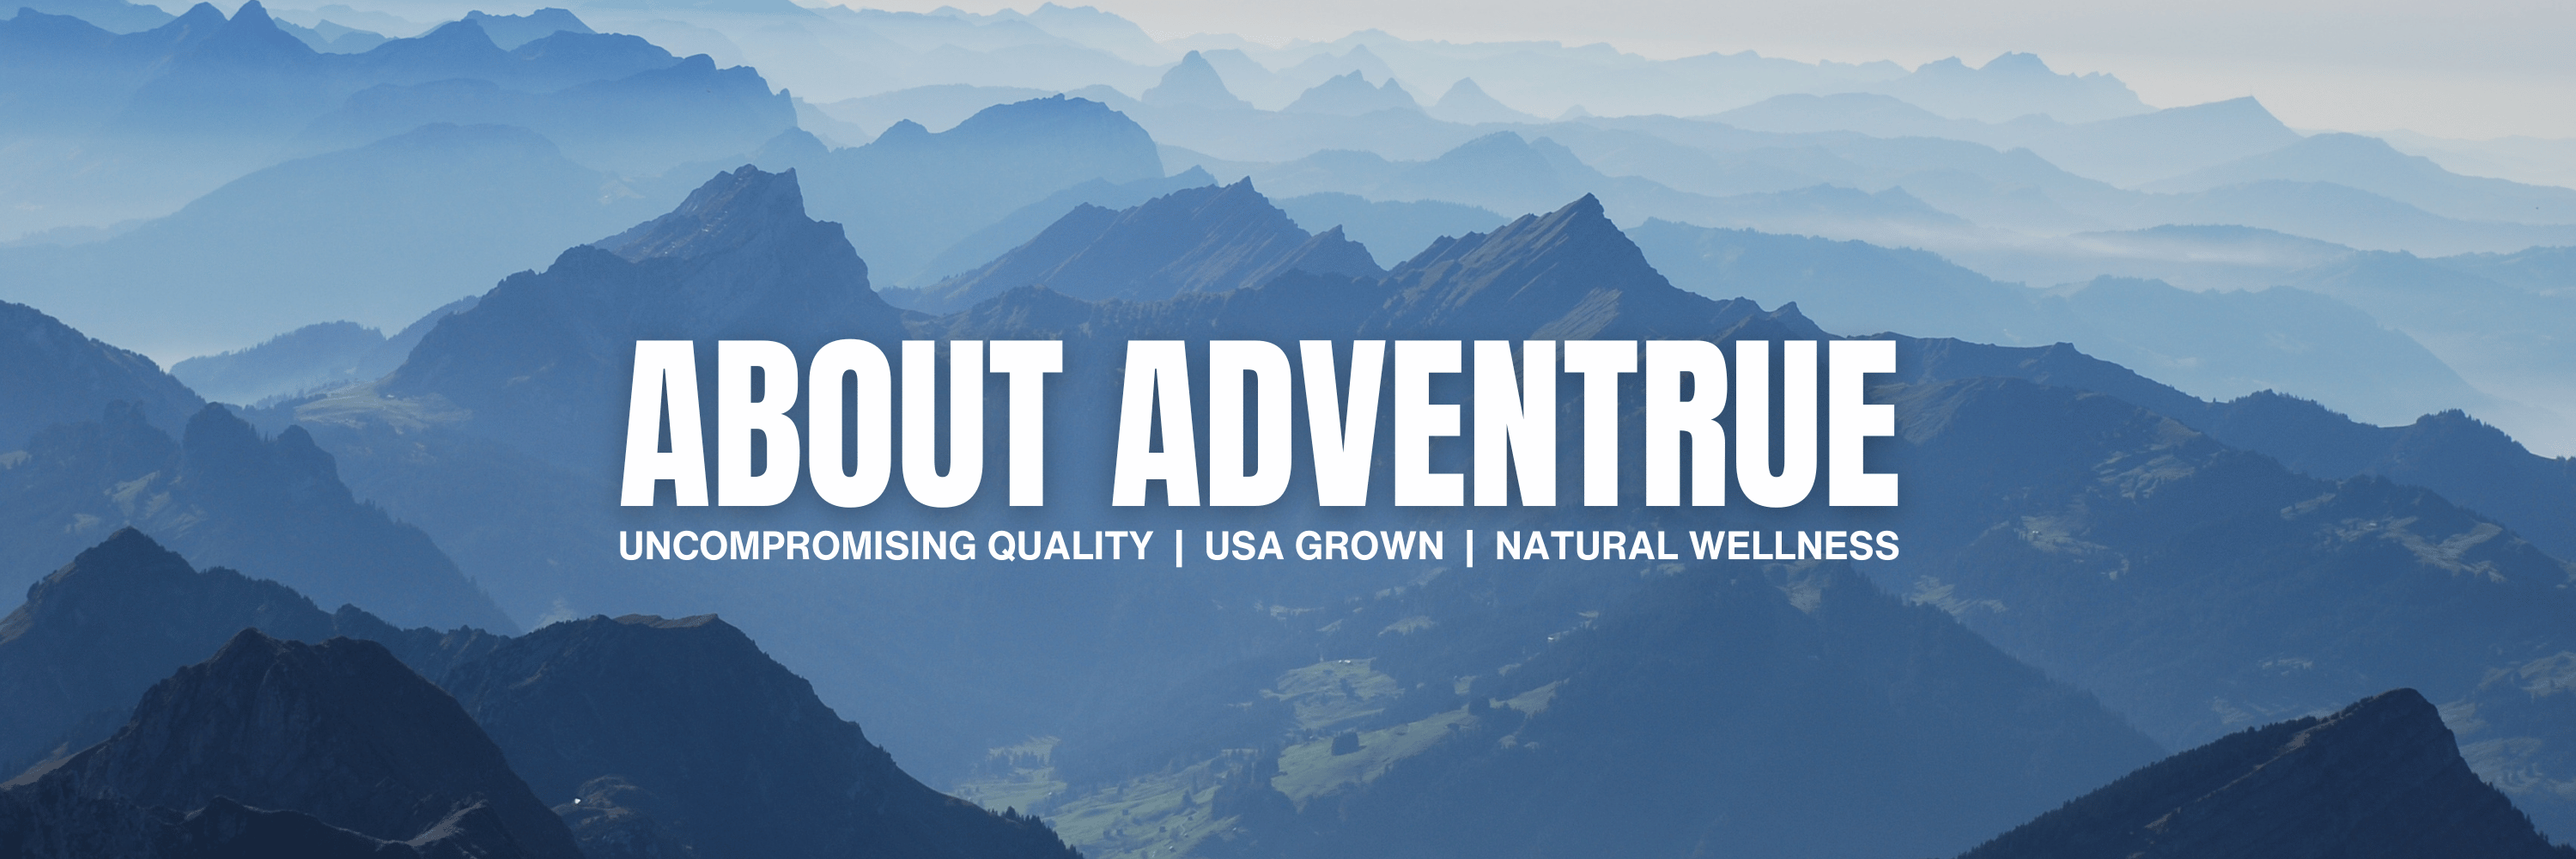 about adventrue: uncompromising quality, usa grown, natural wellness